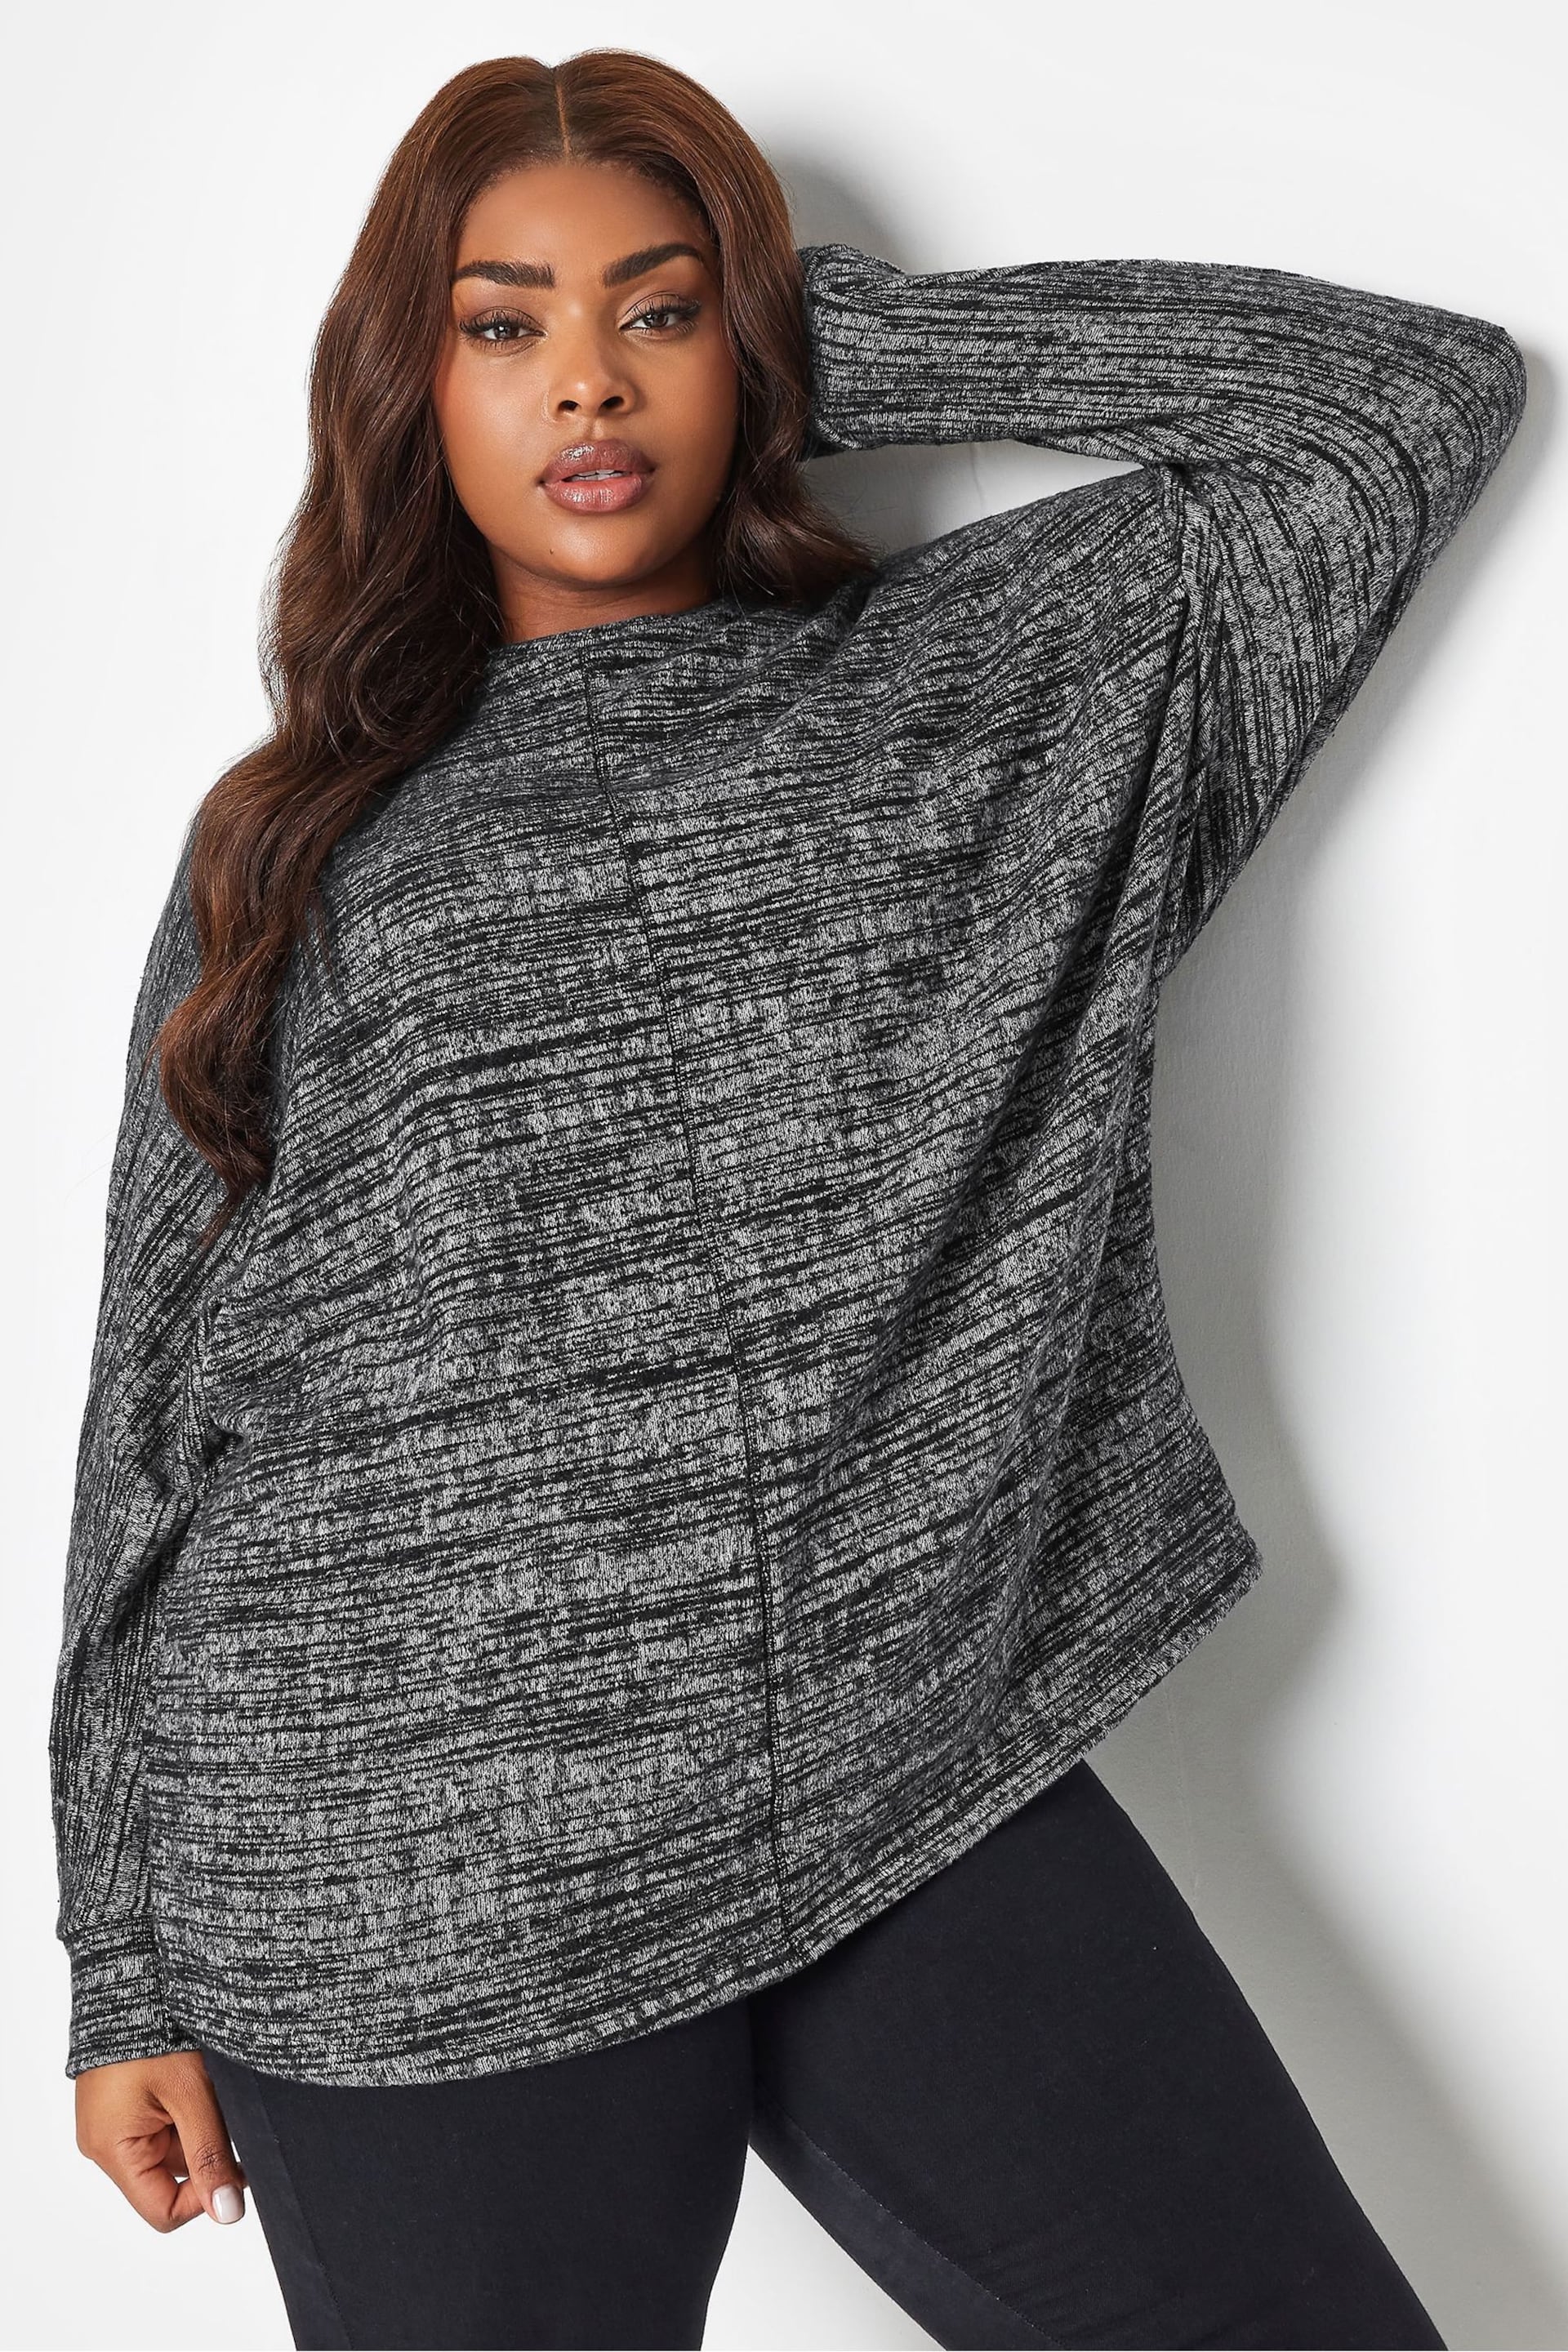 Yours Curve Black Spacedye Soft Touch Front Seam Long Sleeve Top - Image 1 of 4